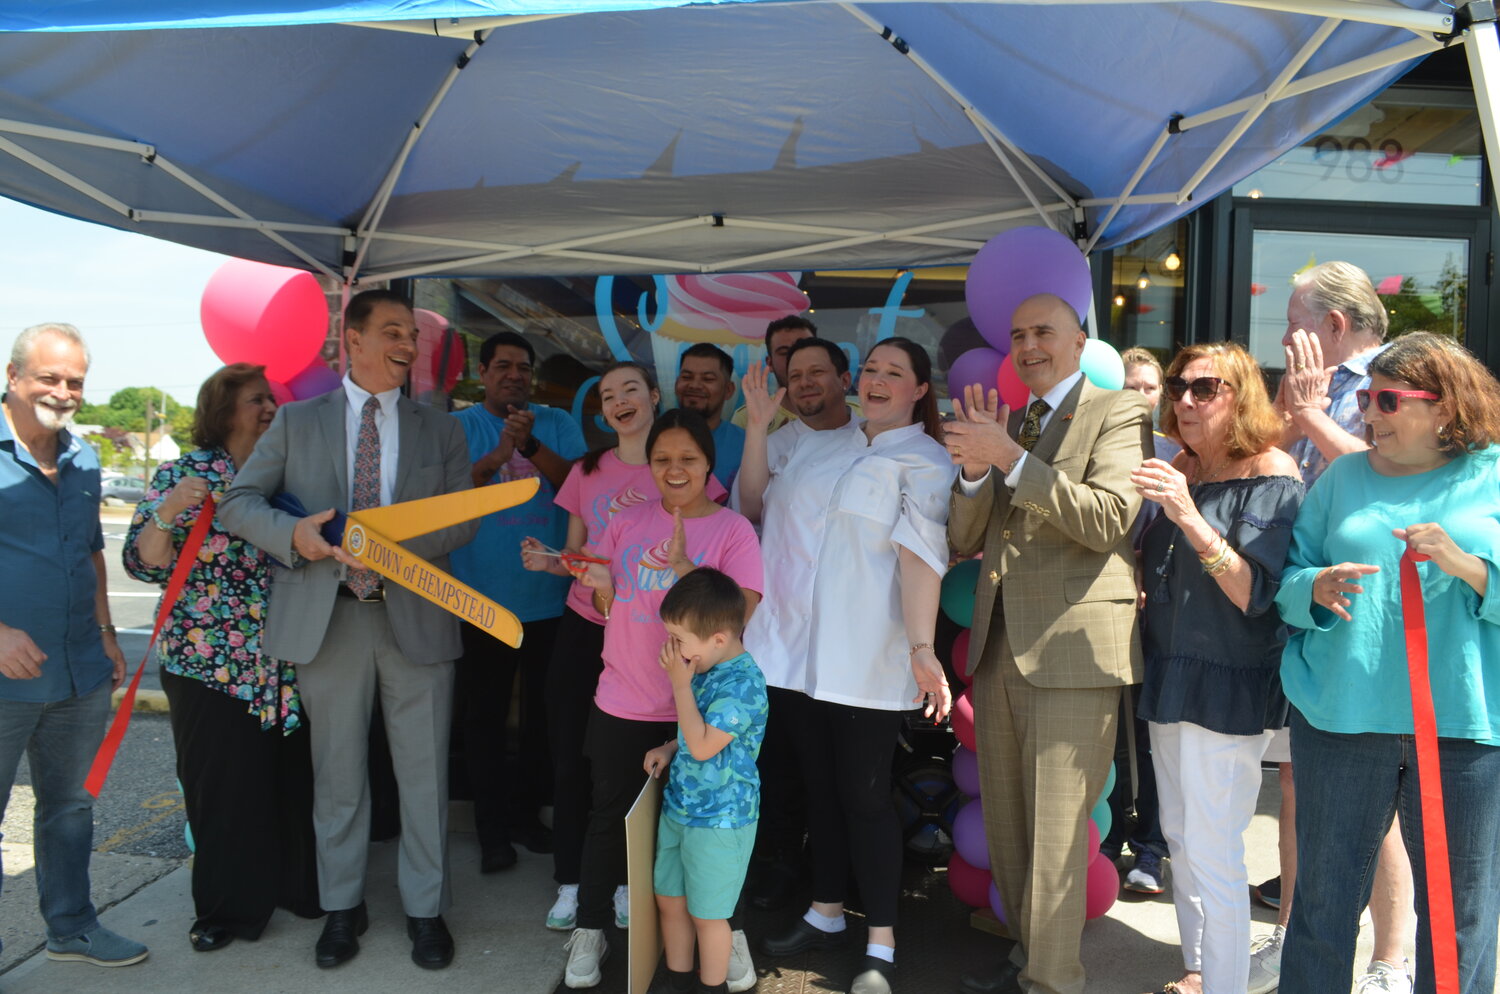 Several elected officials, community members, friends and family came out to show their support at the grand opening of Nicole Minor and Jose Velasquez’s new bakeshop The Sweet Life in Franklin Square.